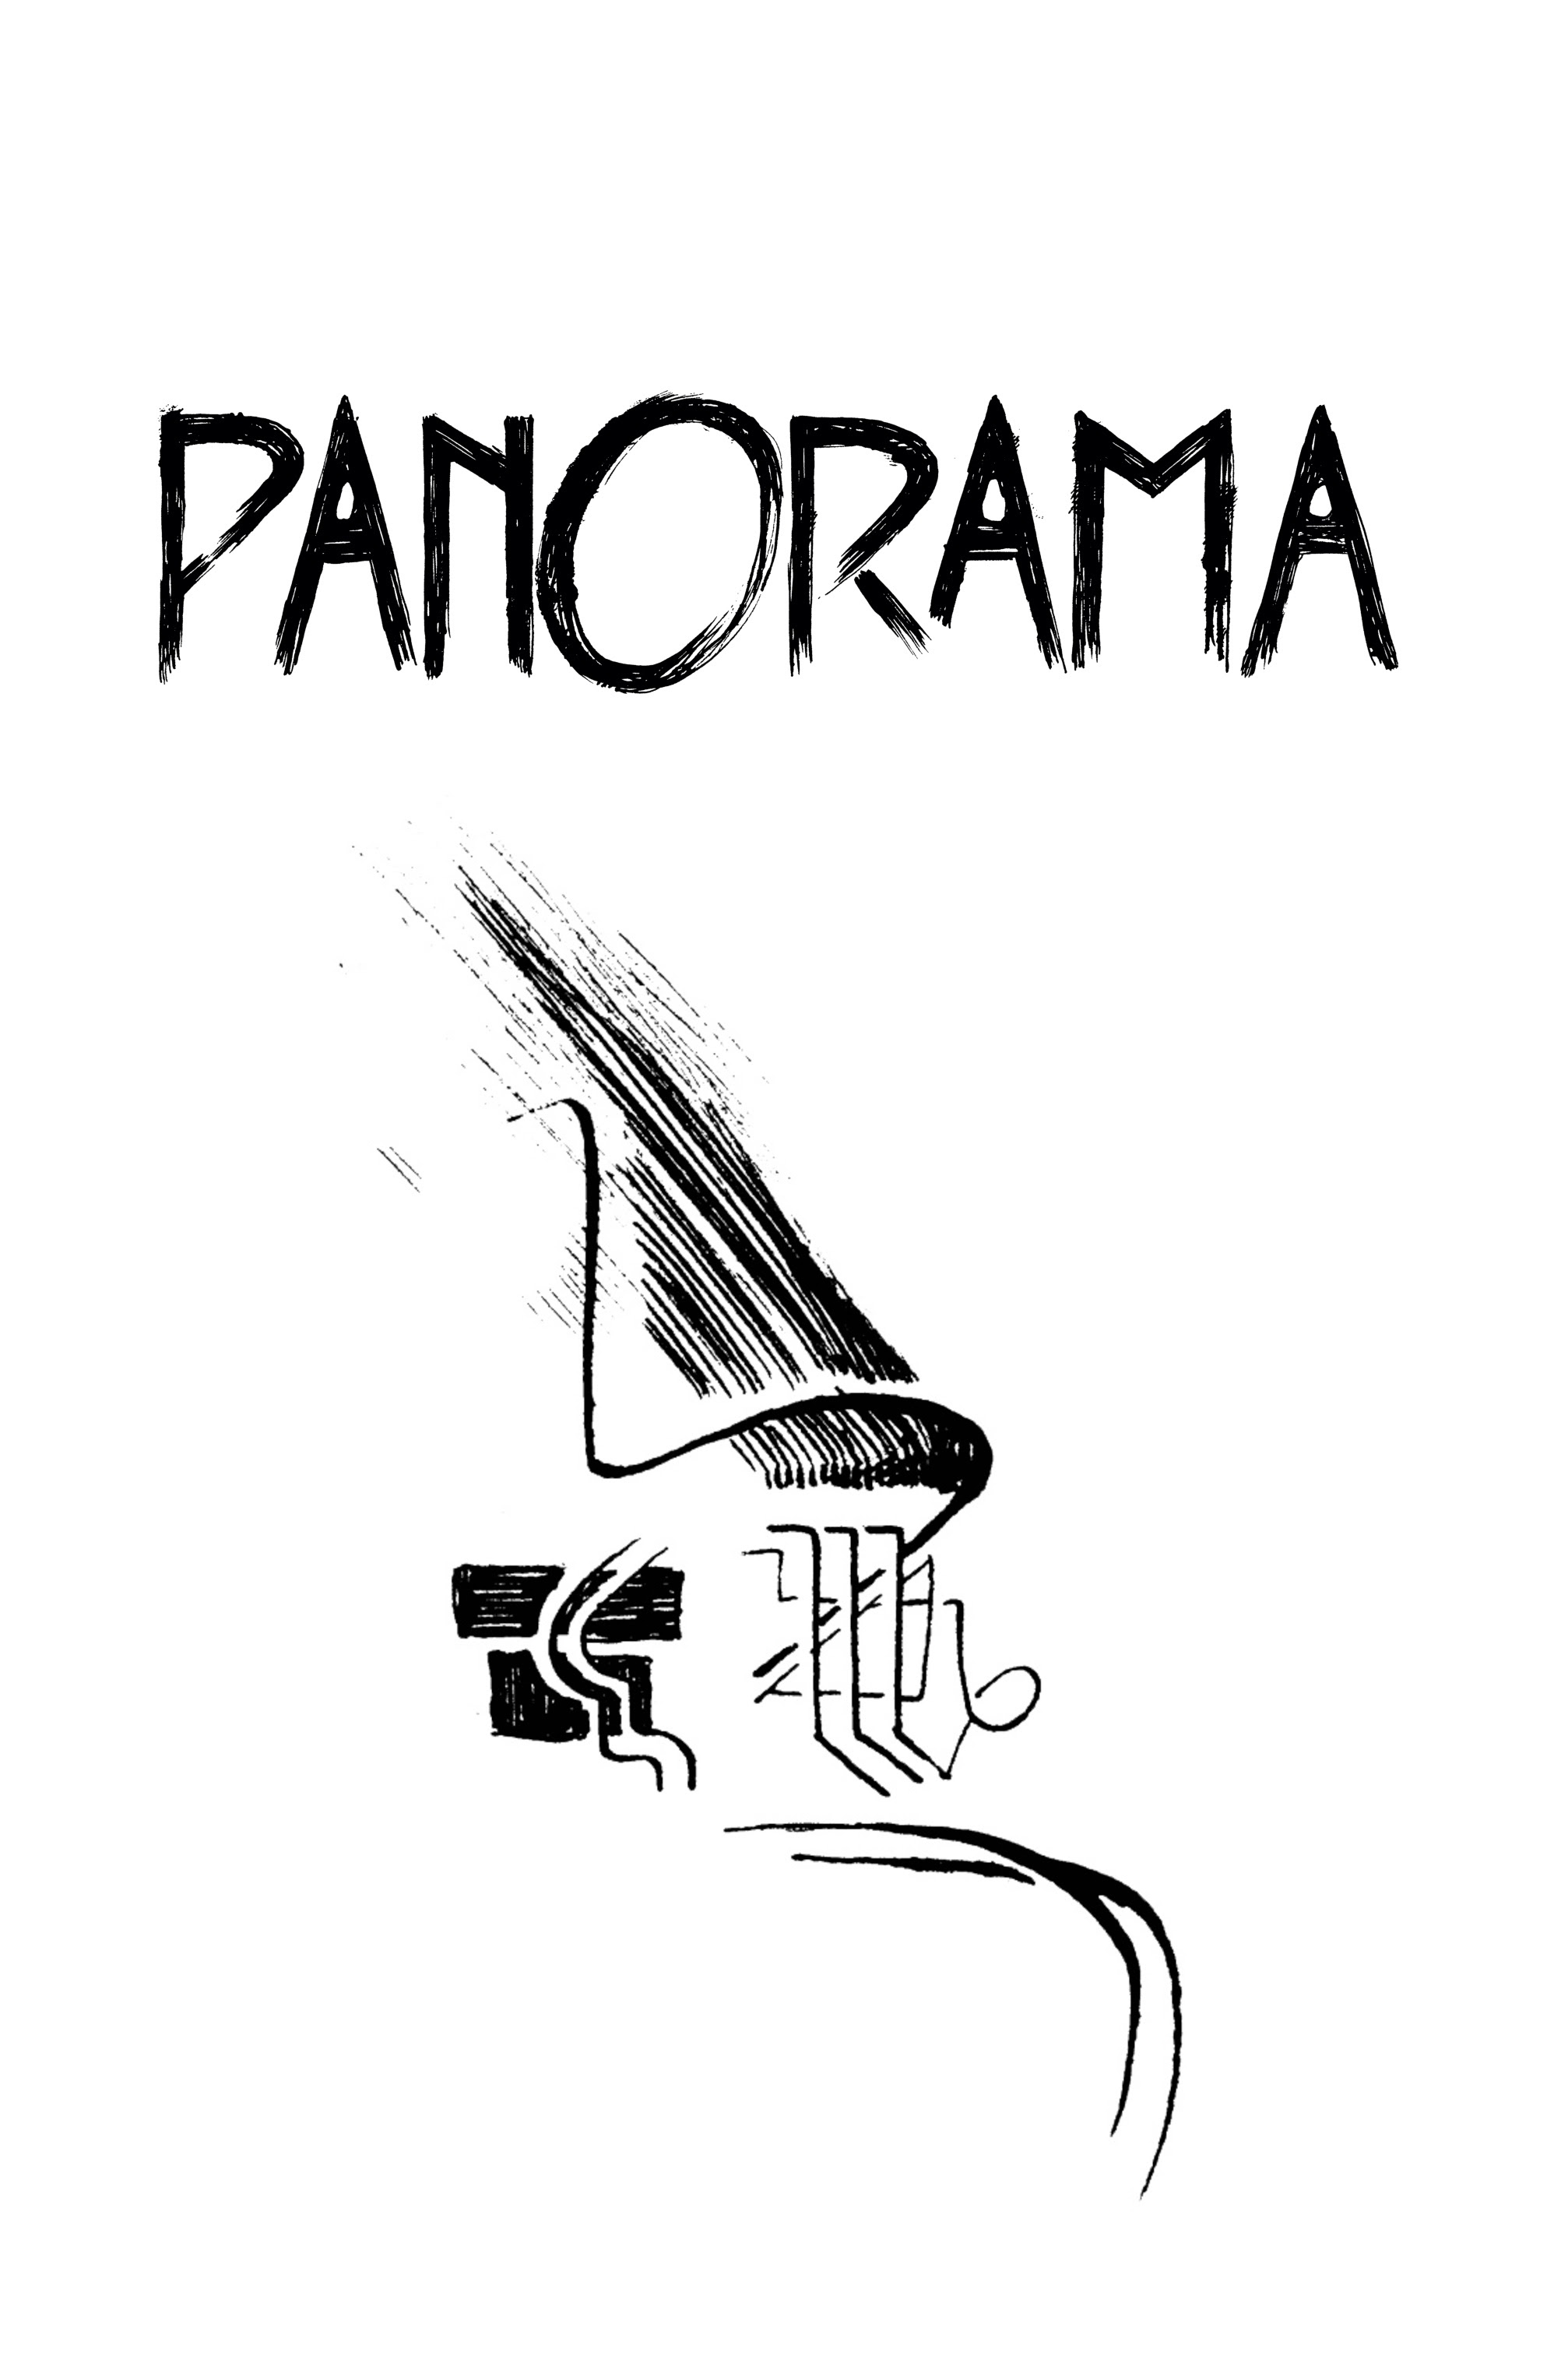 Read online Panorama comic -  Issue # TPB - 3